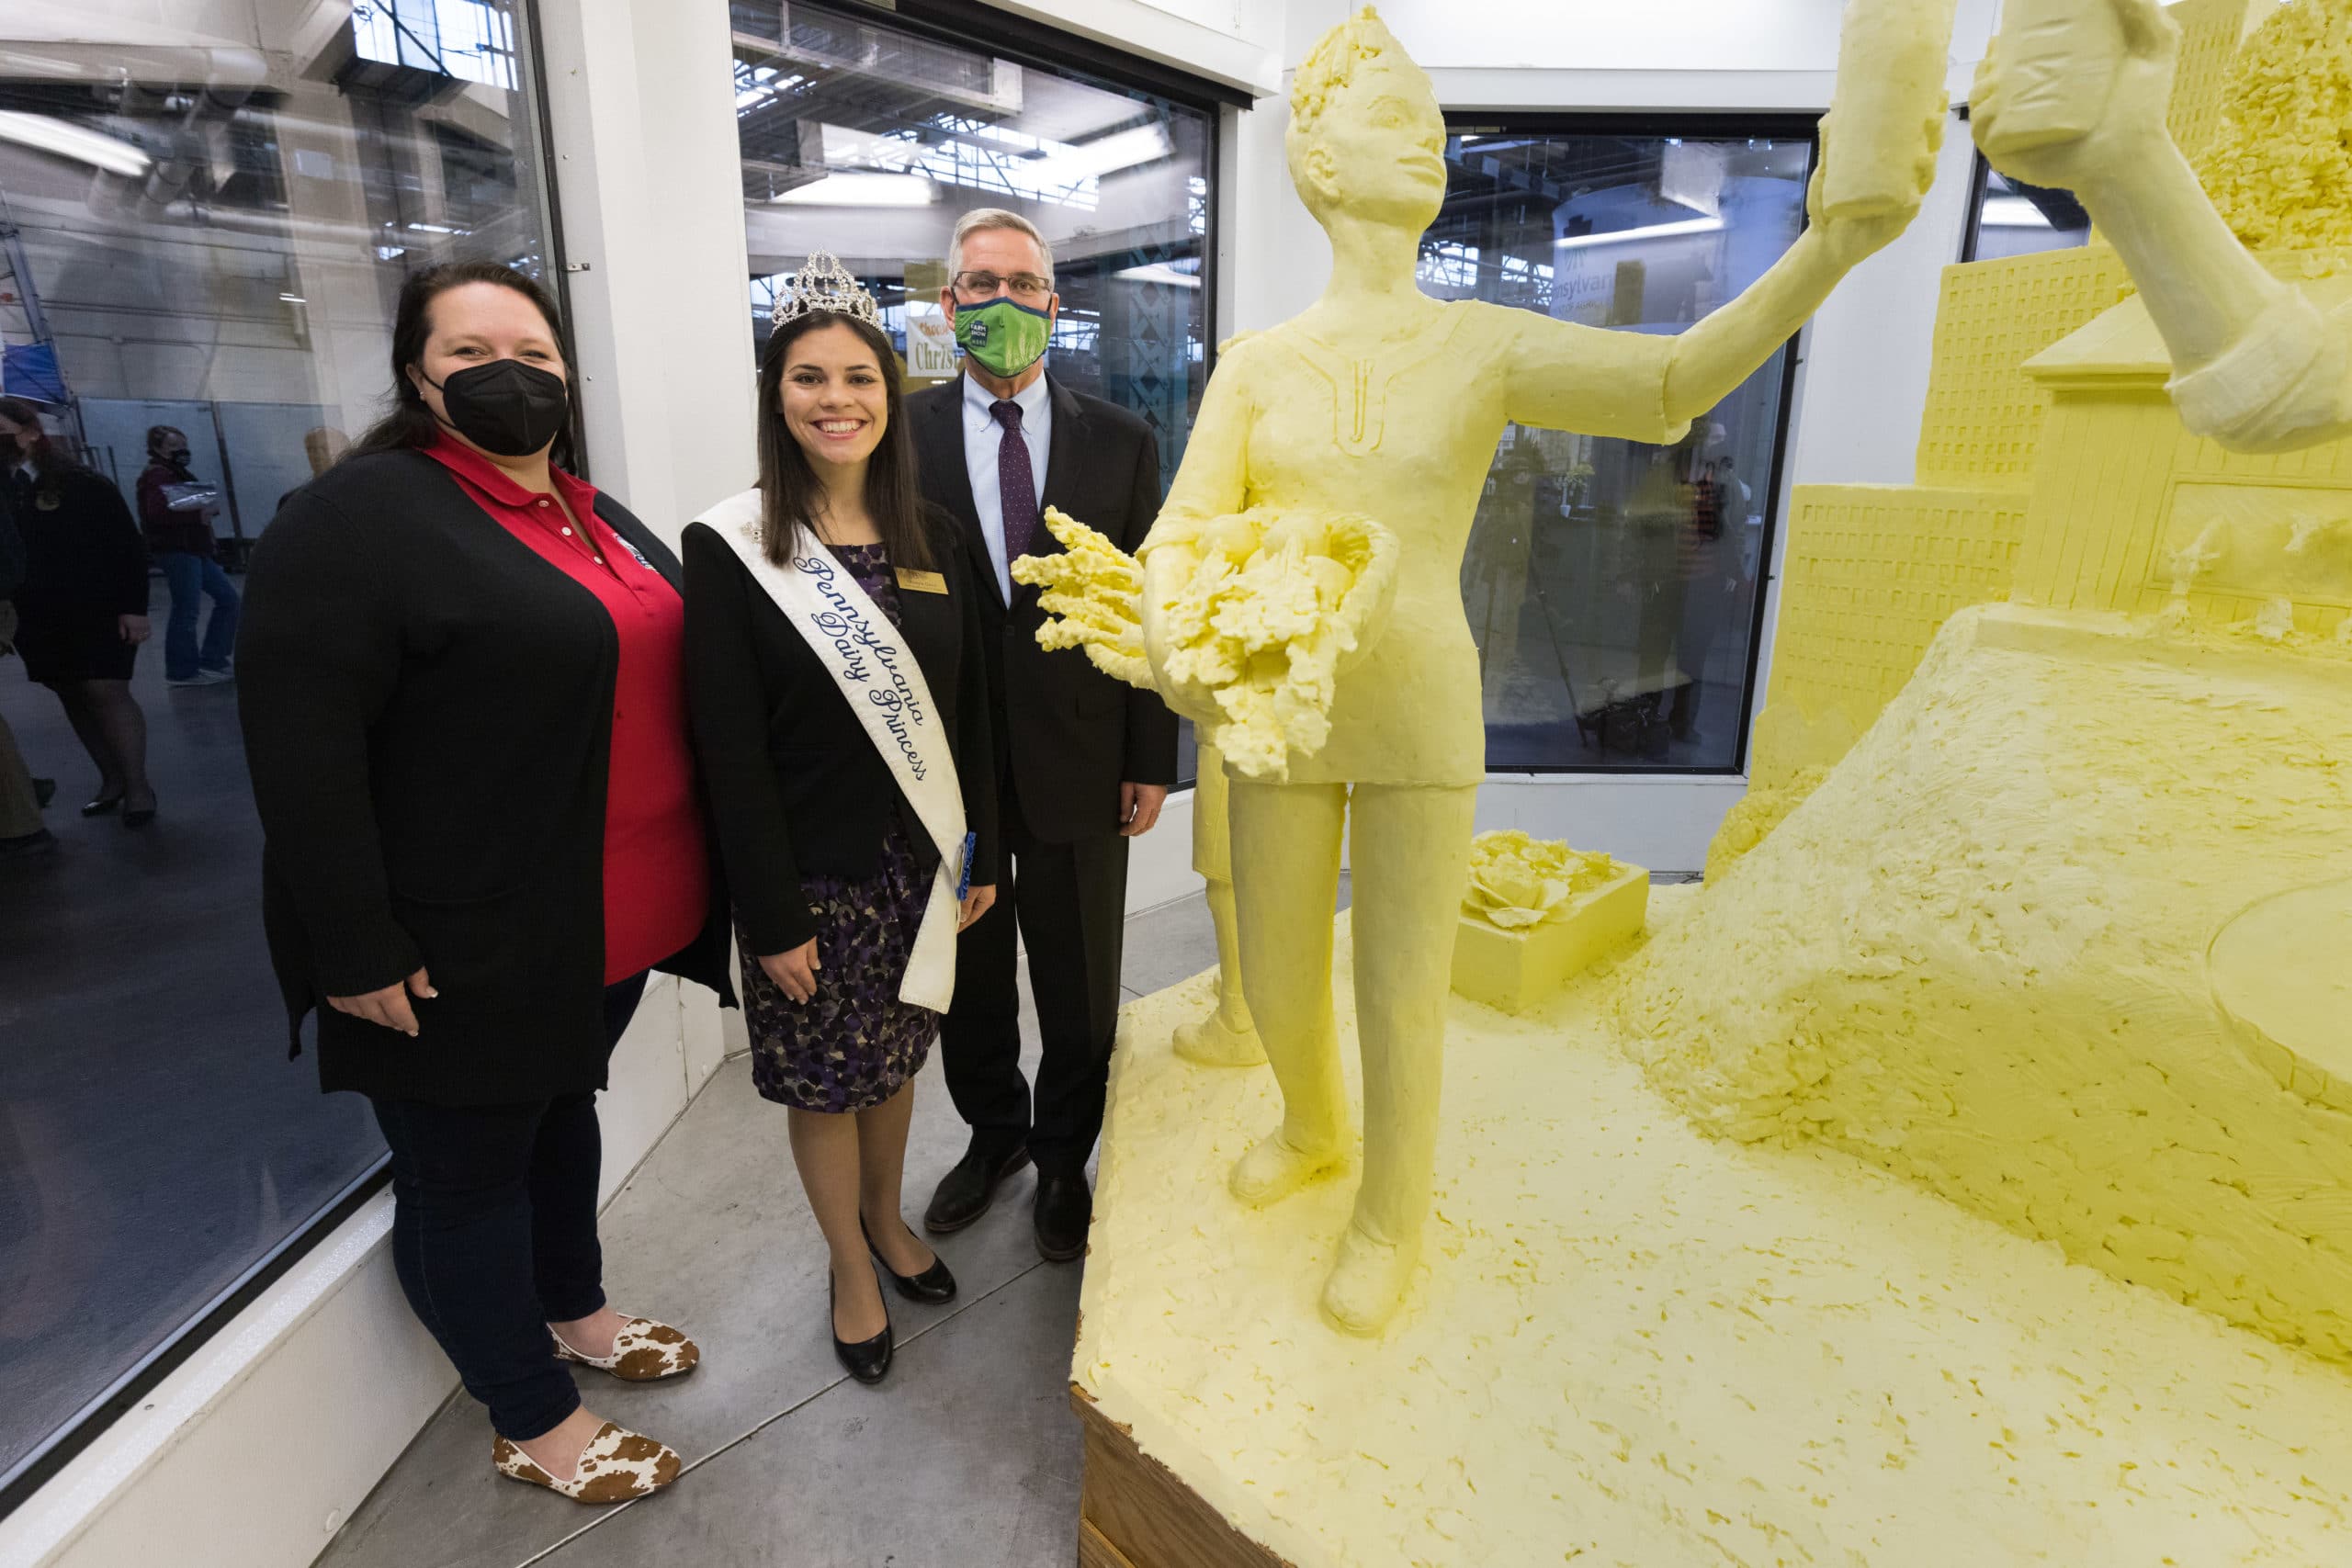 ‘Harvesting More, Together’ – Butter Sculpture Brings Together Rural and Urban Farmers to Promote Agriculture